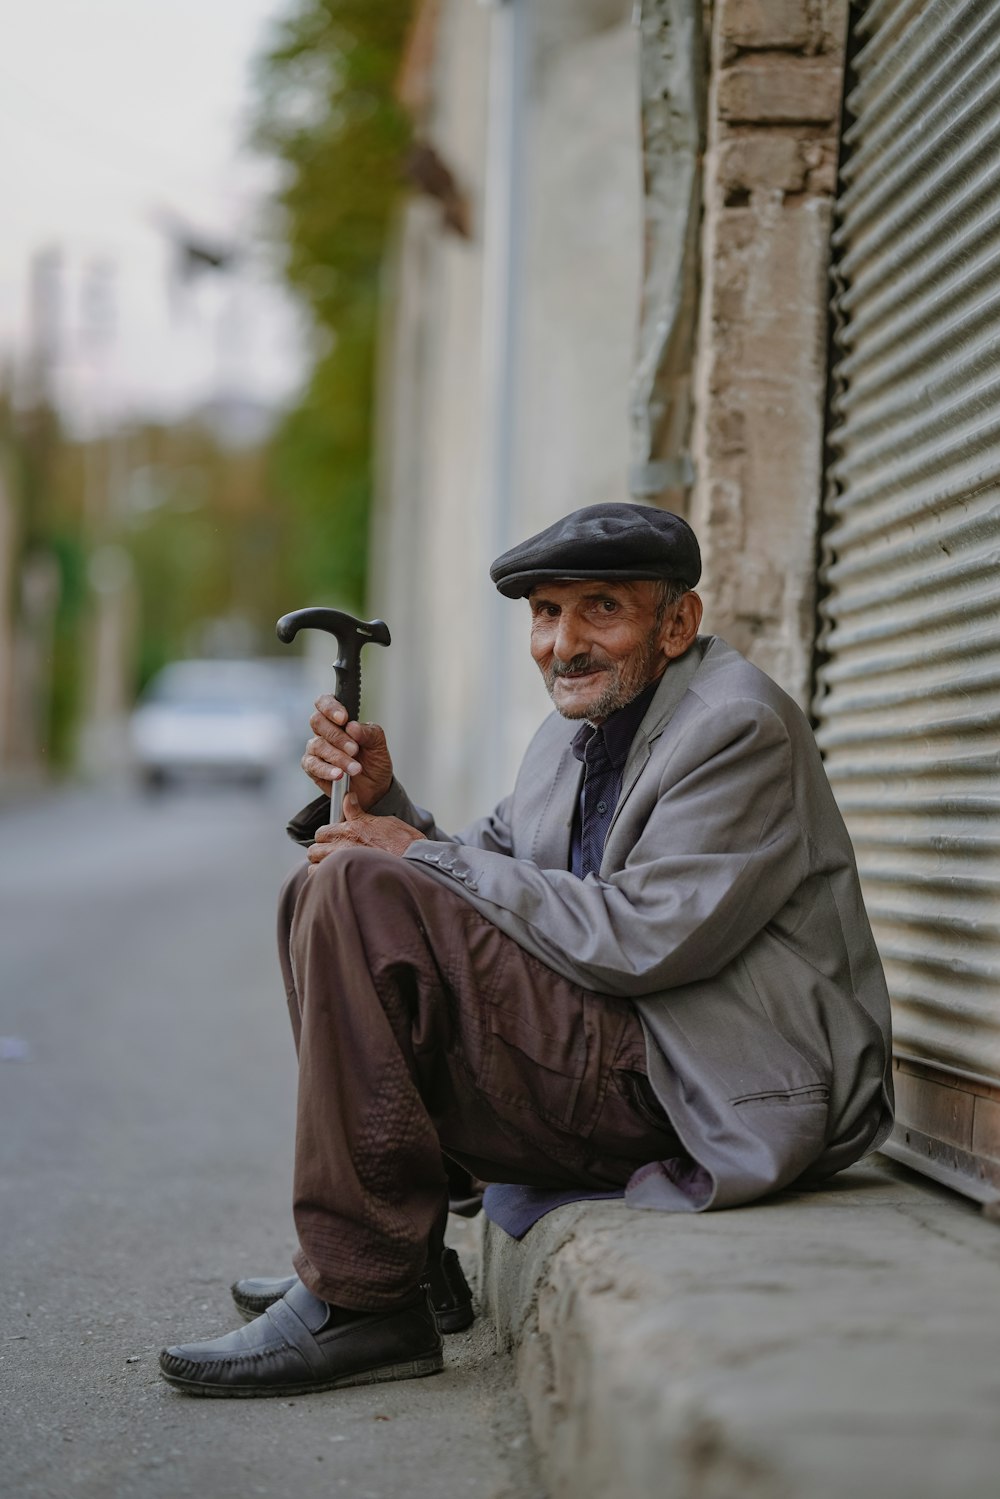 a man sitting on the side of a building holding an umbrella